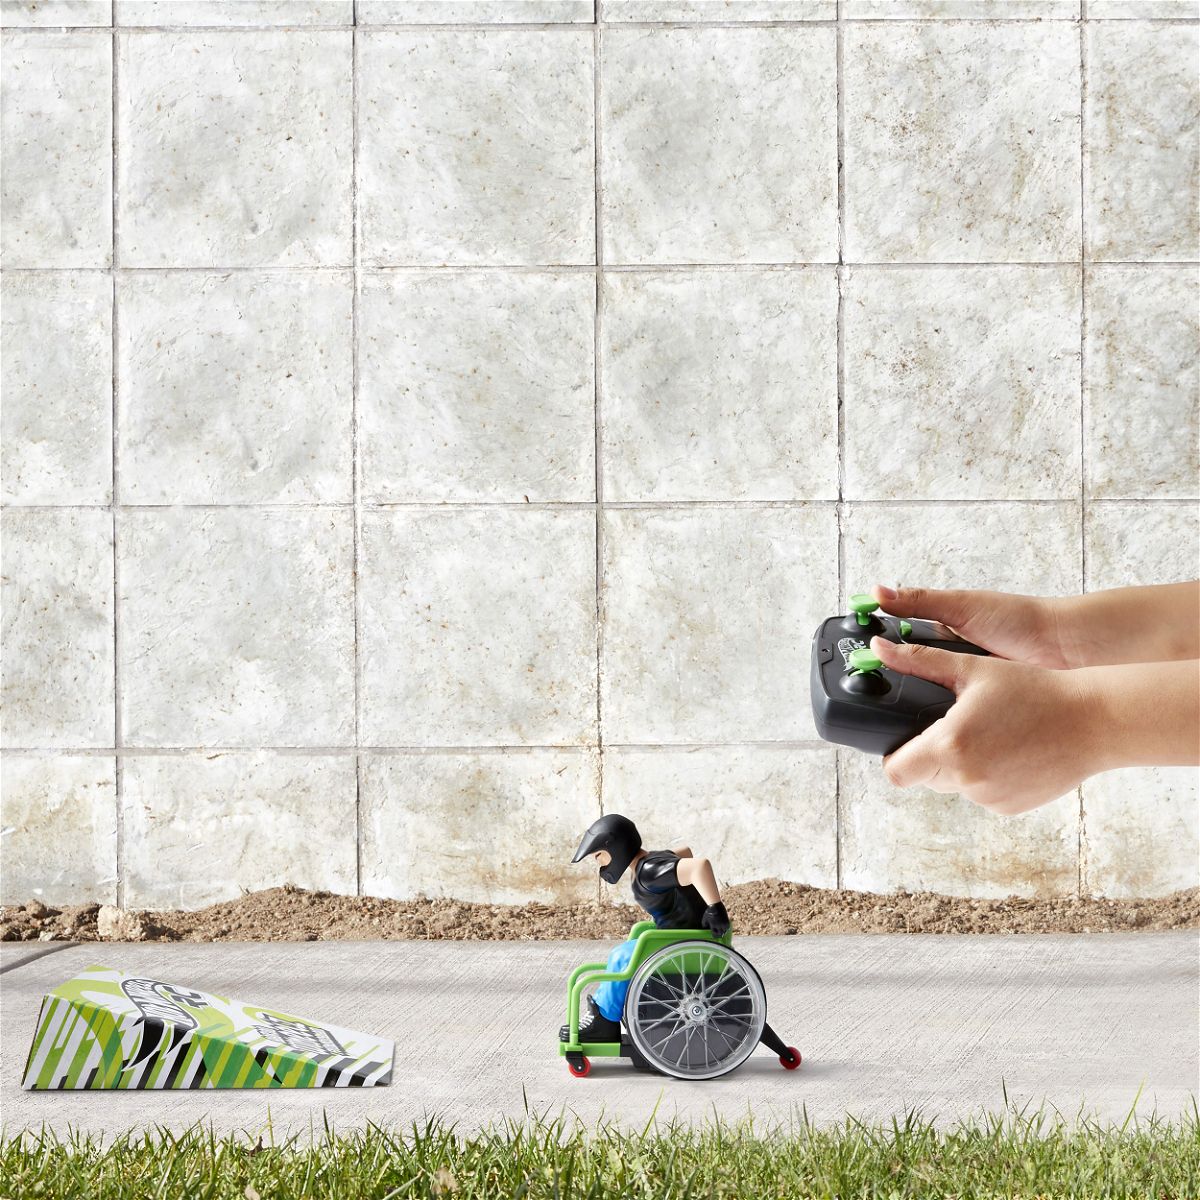 	Hot Wheels launches first remote-controlled wheelchair toy in partnership with Paralympian.